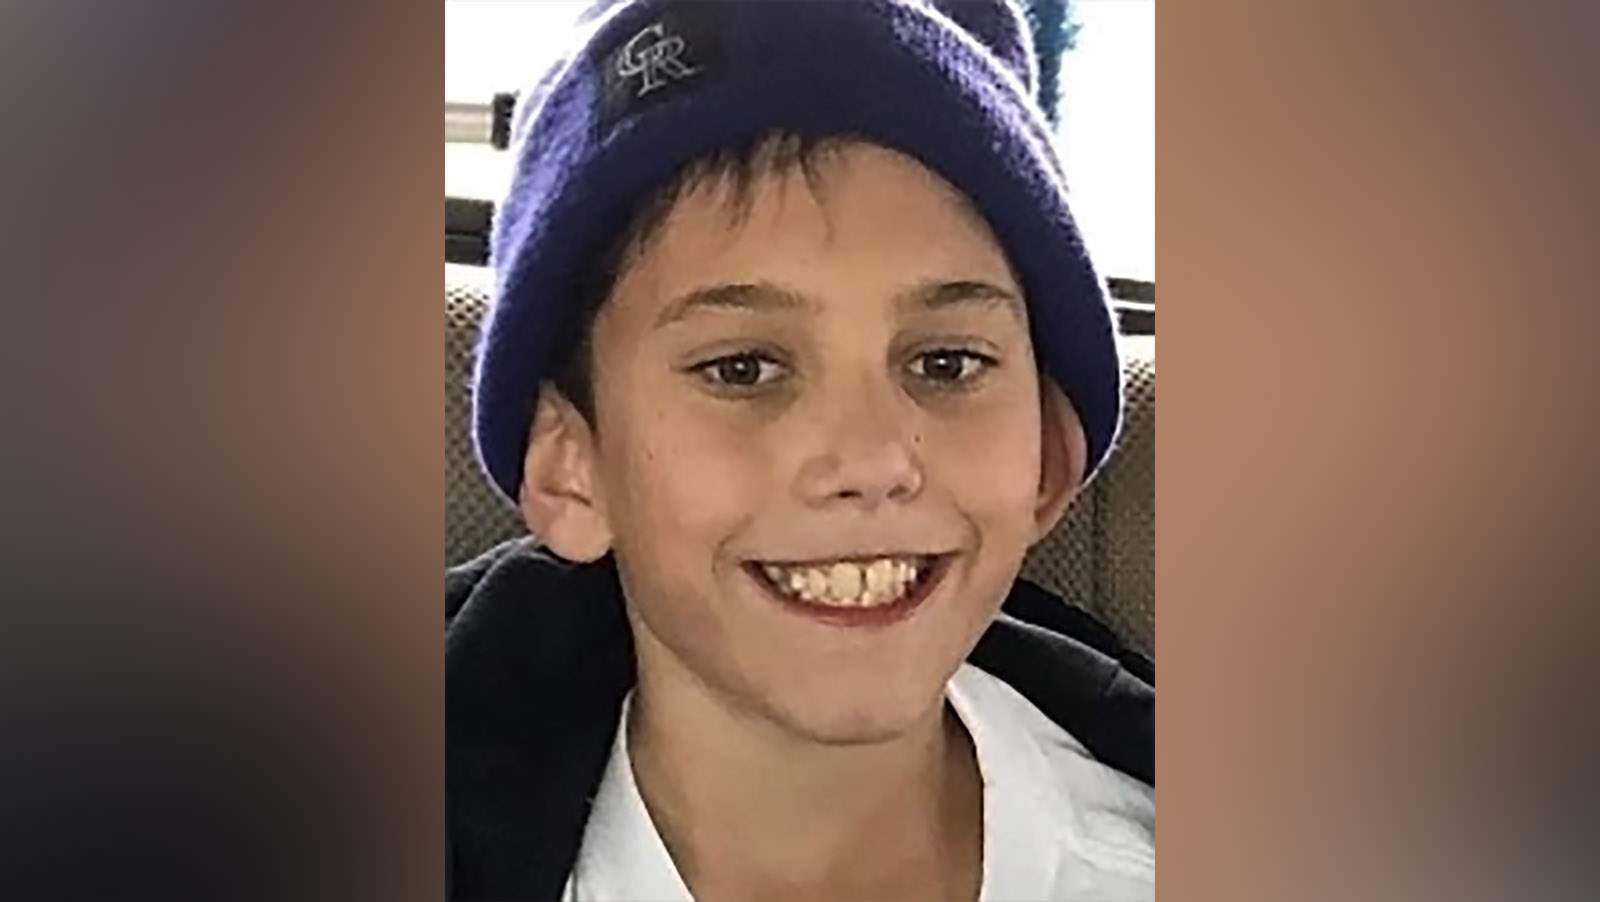 An 11-year-old boy went to play at a friend’s house last week. No one has seen him since